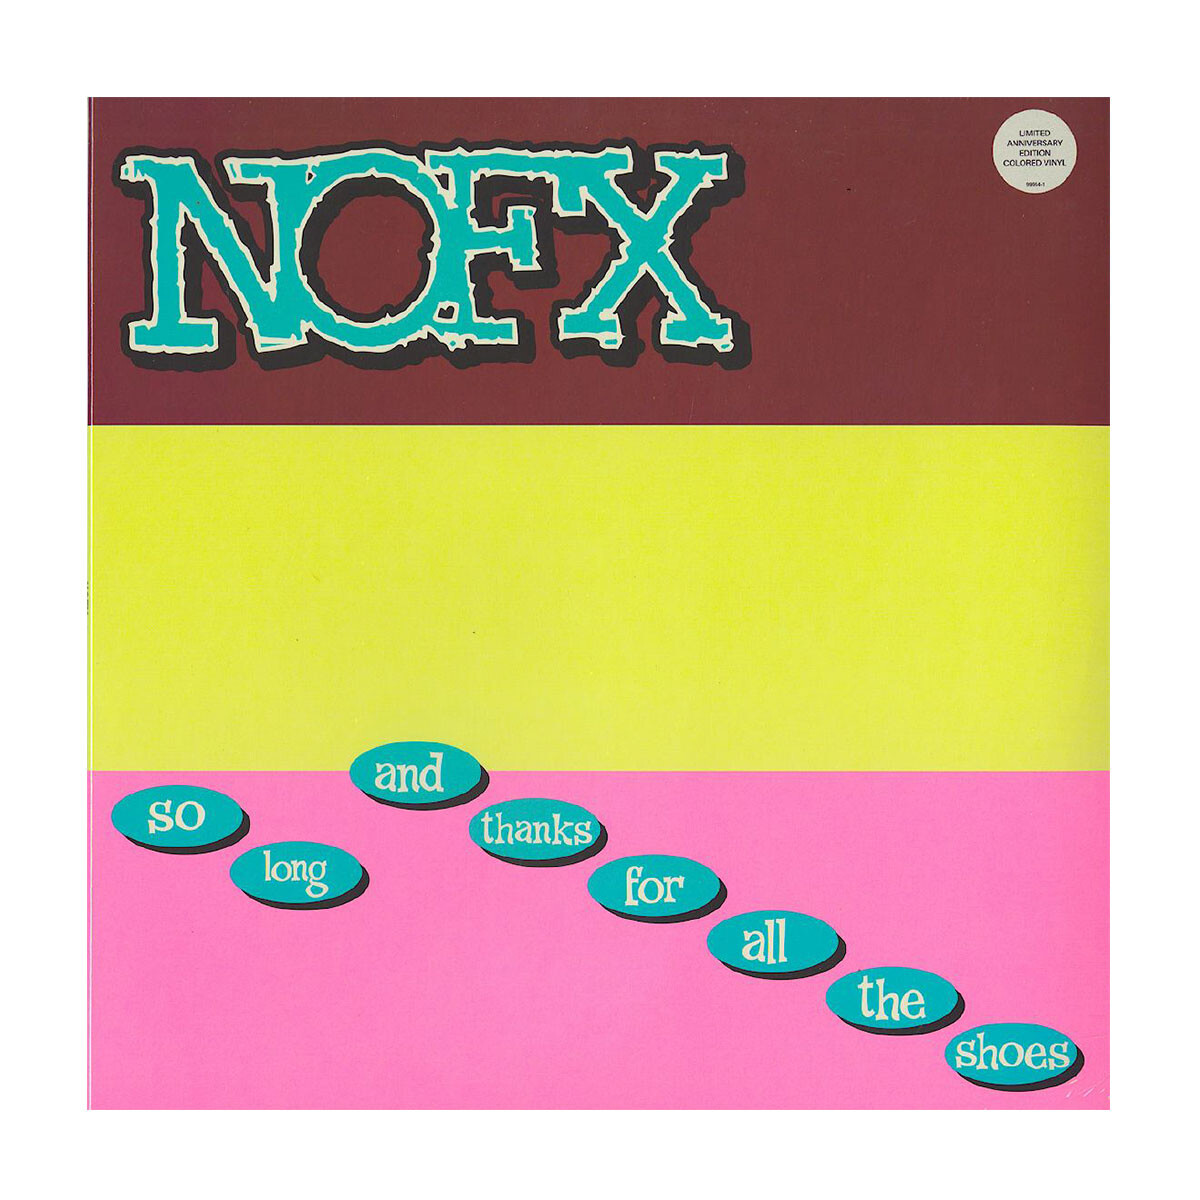 Nofx / So Long And Thanks For All The Shoes - Vinilo 